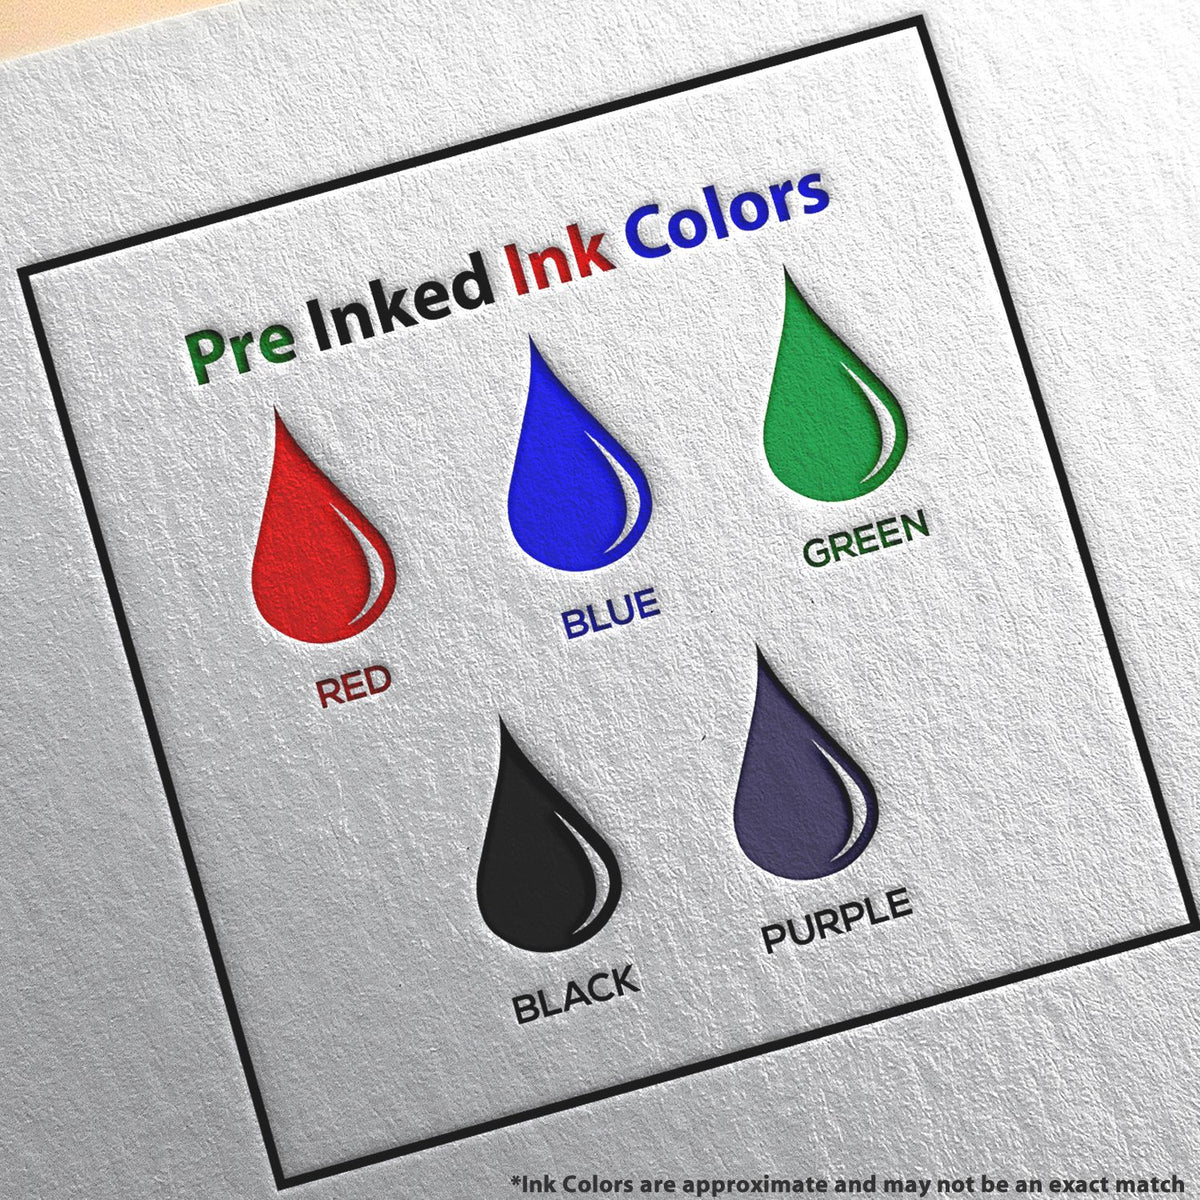 A picture showing the different ink colors or hues available for the Slim Pre-Inked Tennessee Landscape Architect Seal Stamp product.